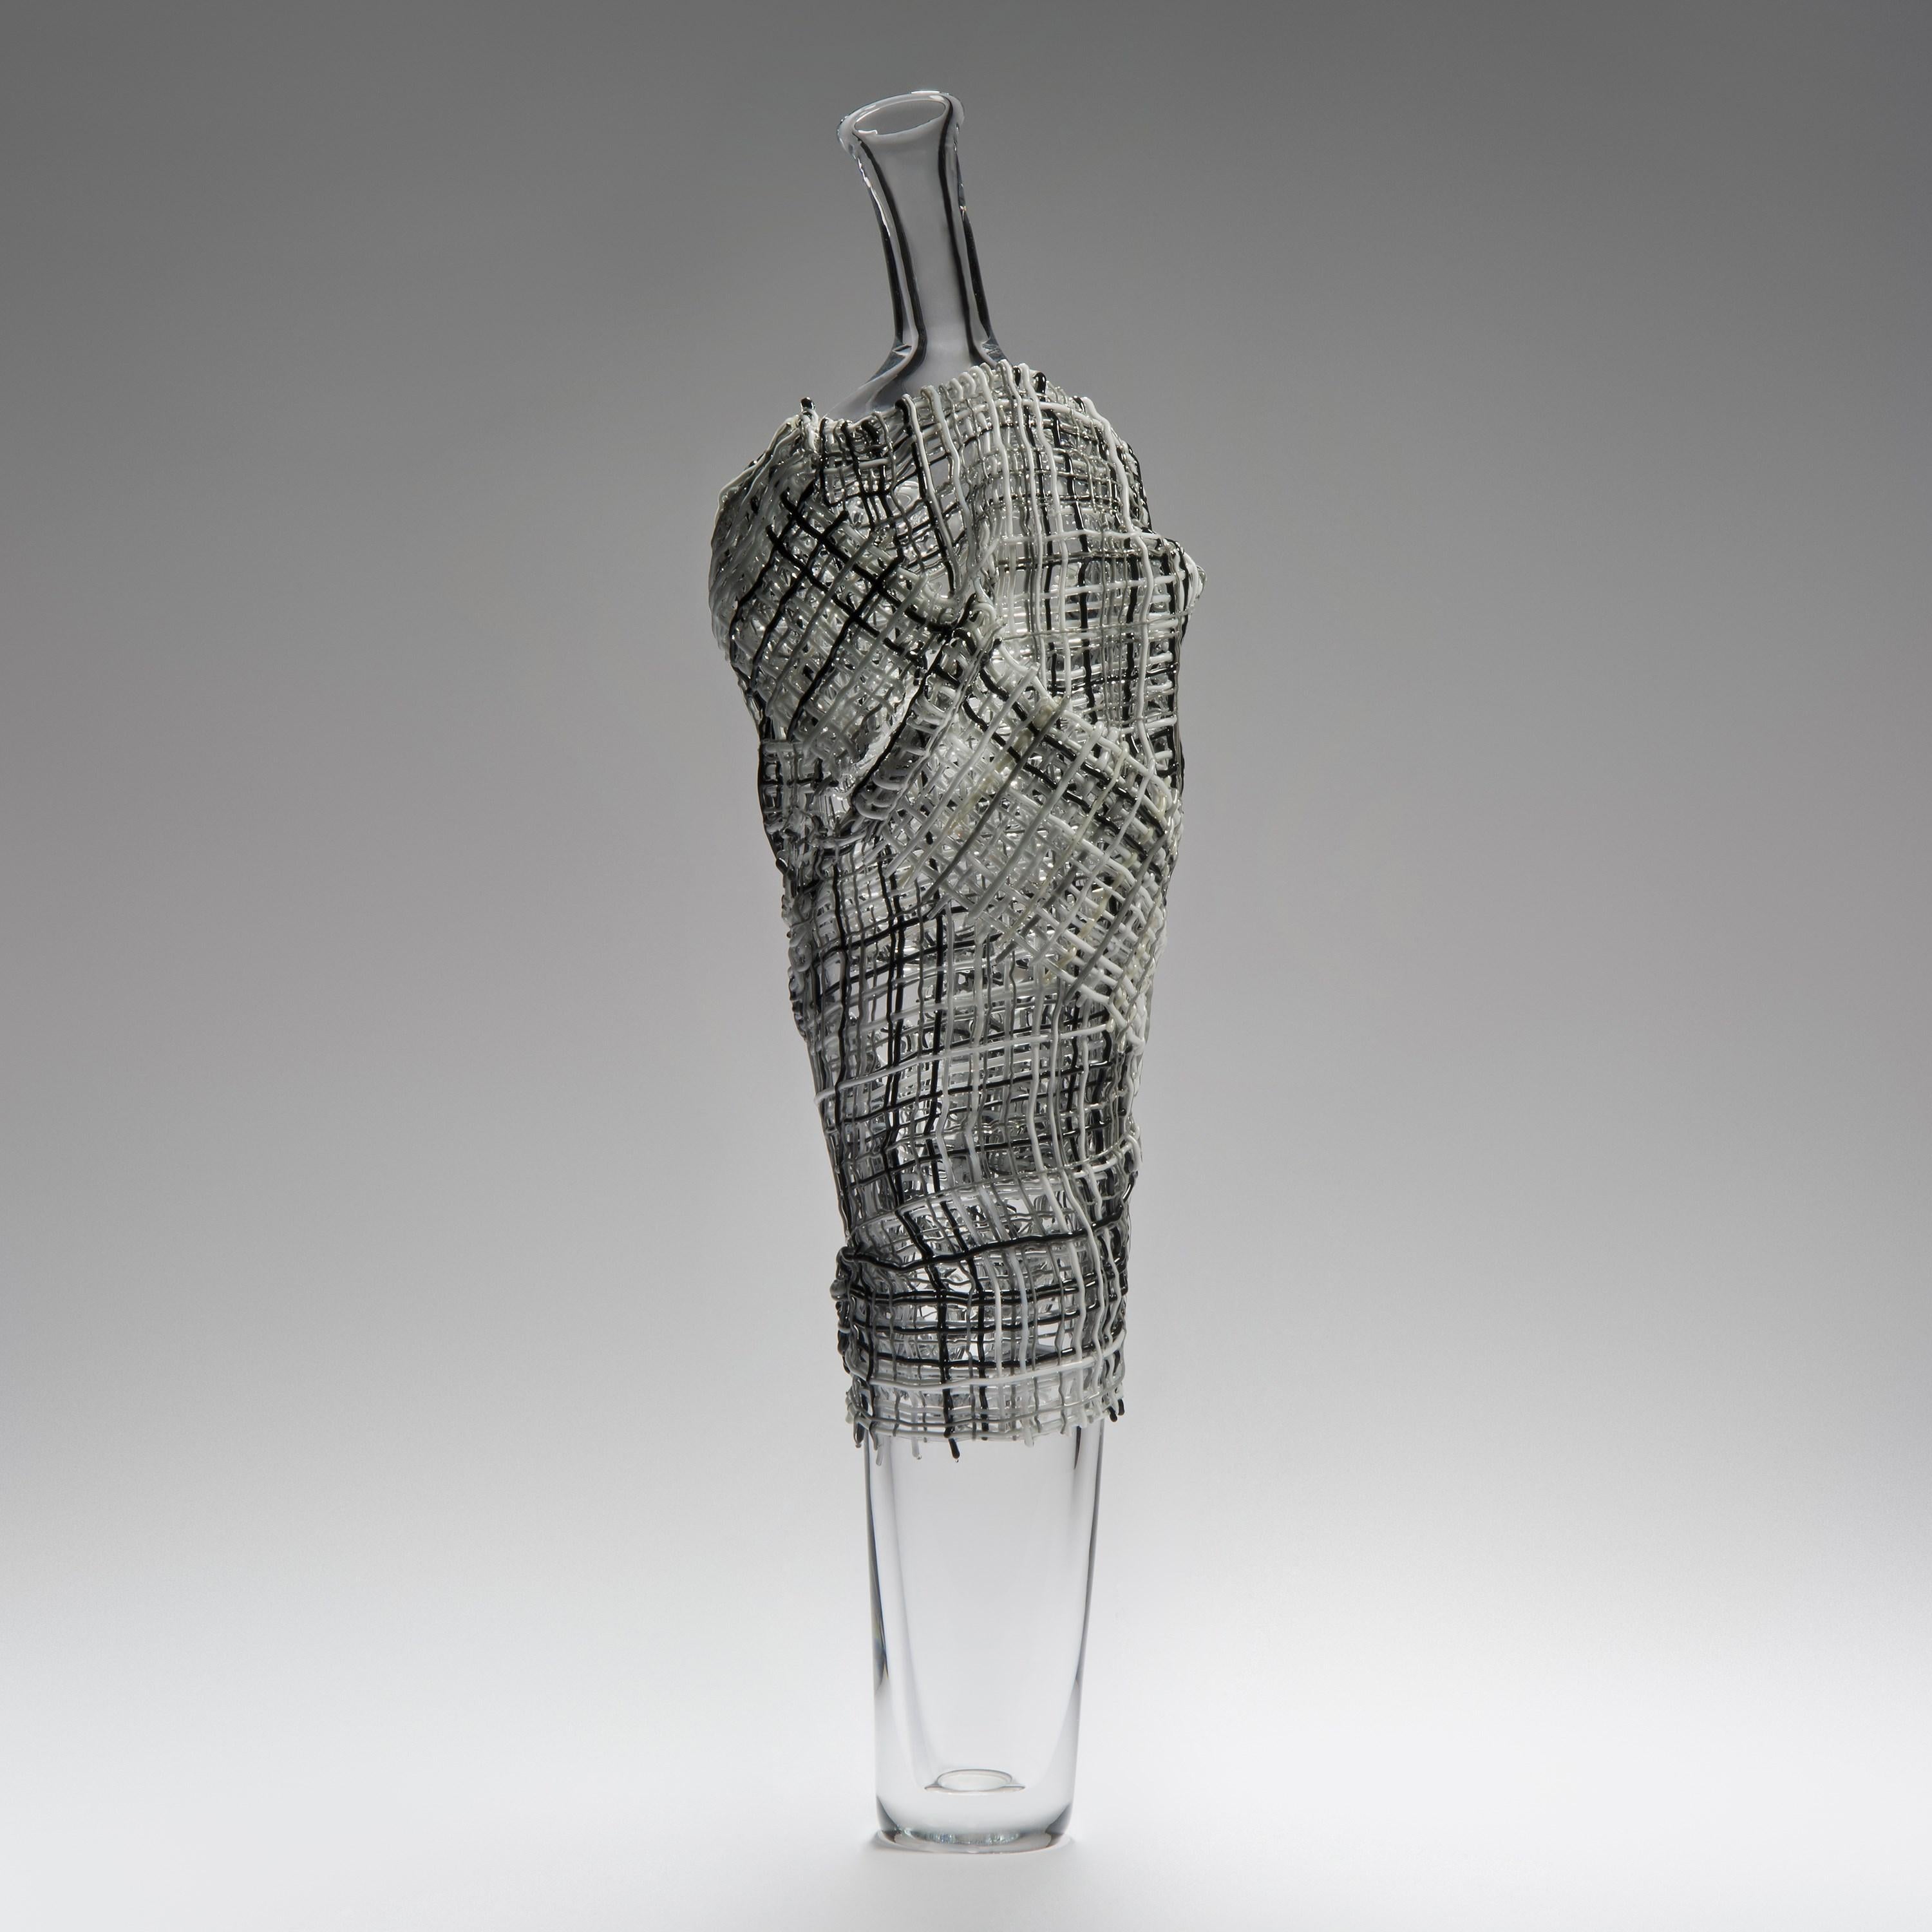 Classical Greek  Ares, a black, white & grey figurative glass sculpture by Cathryn Shilling For Sale